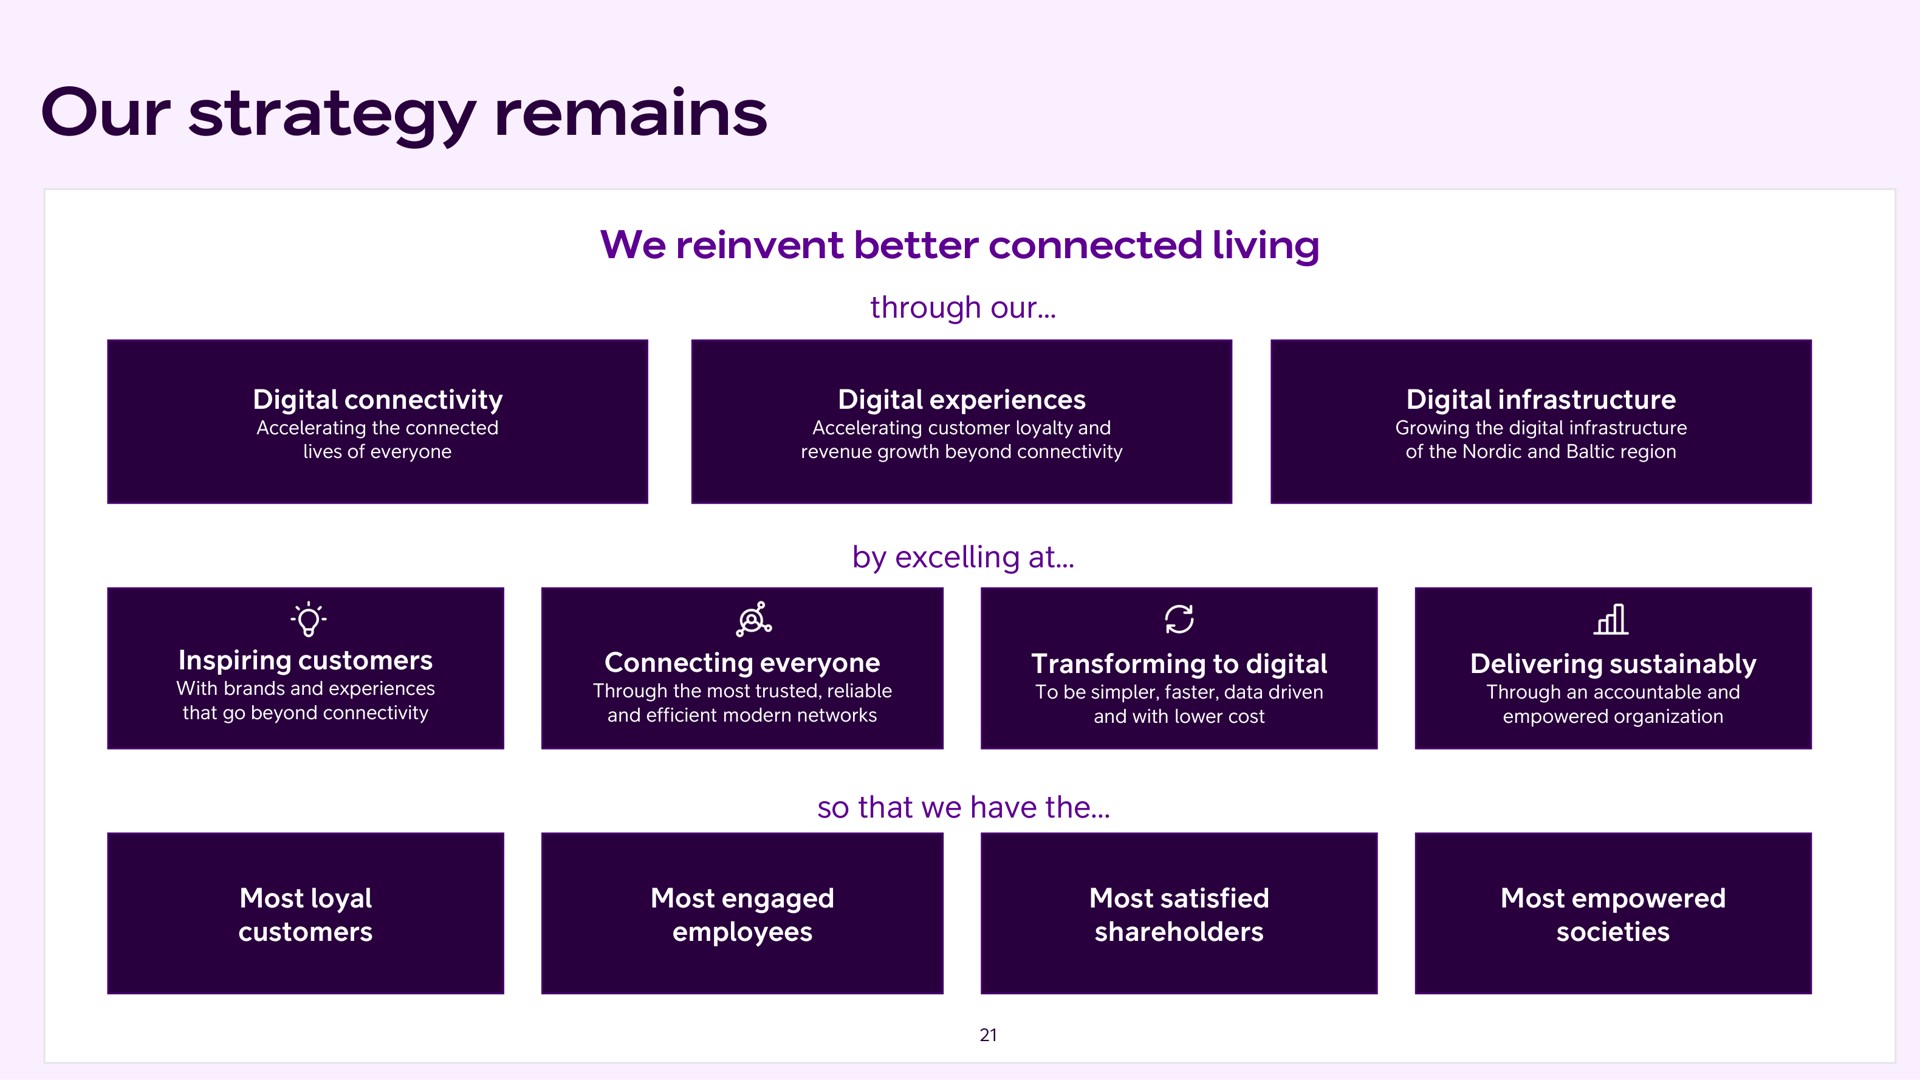 our strategy remains | Telia Company